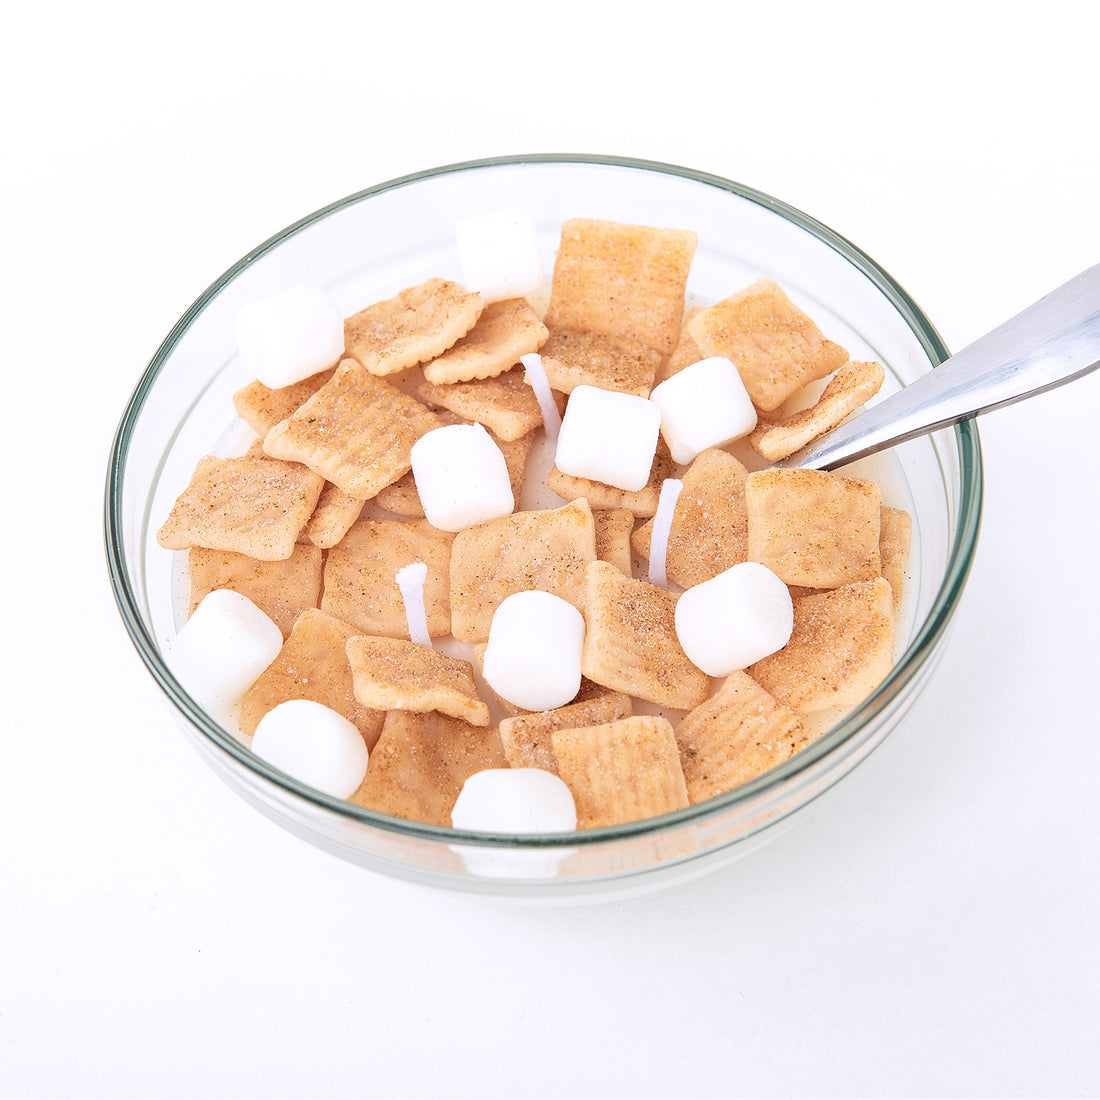 Fill your home with the scents of Cinnamon Cereal Bowl.